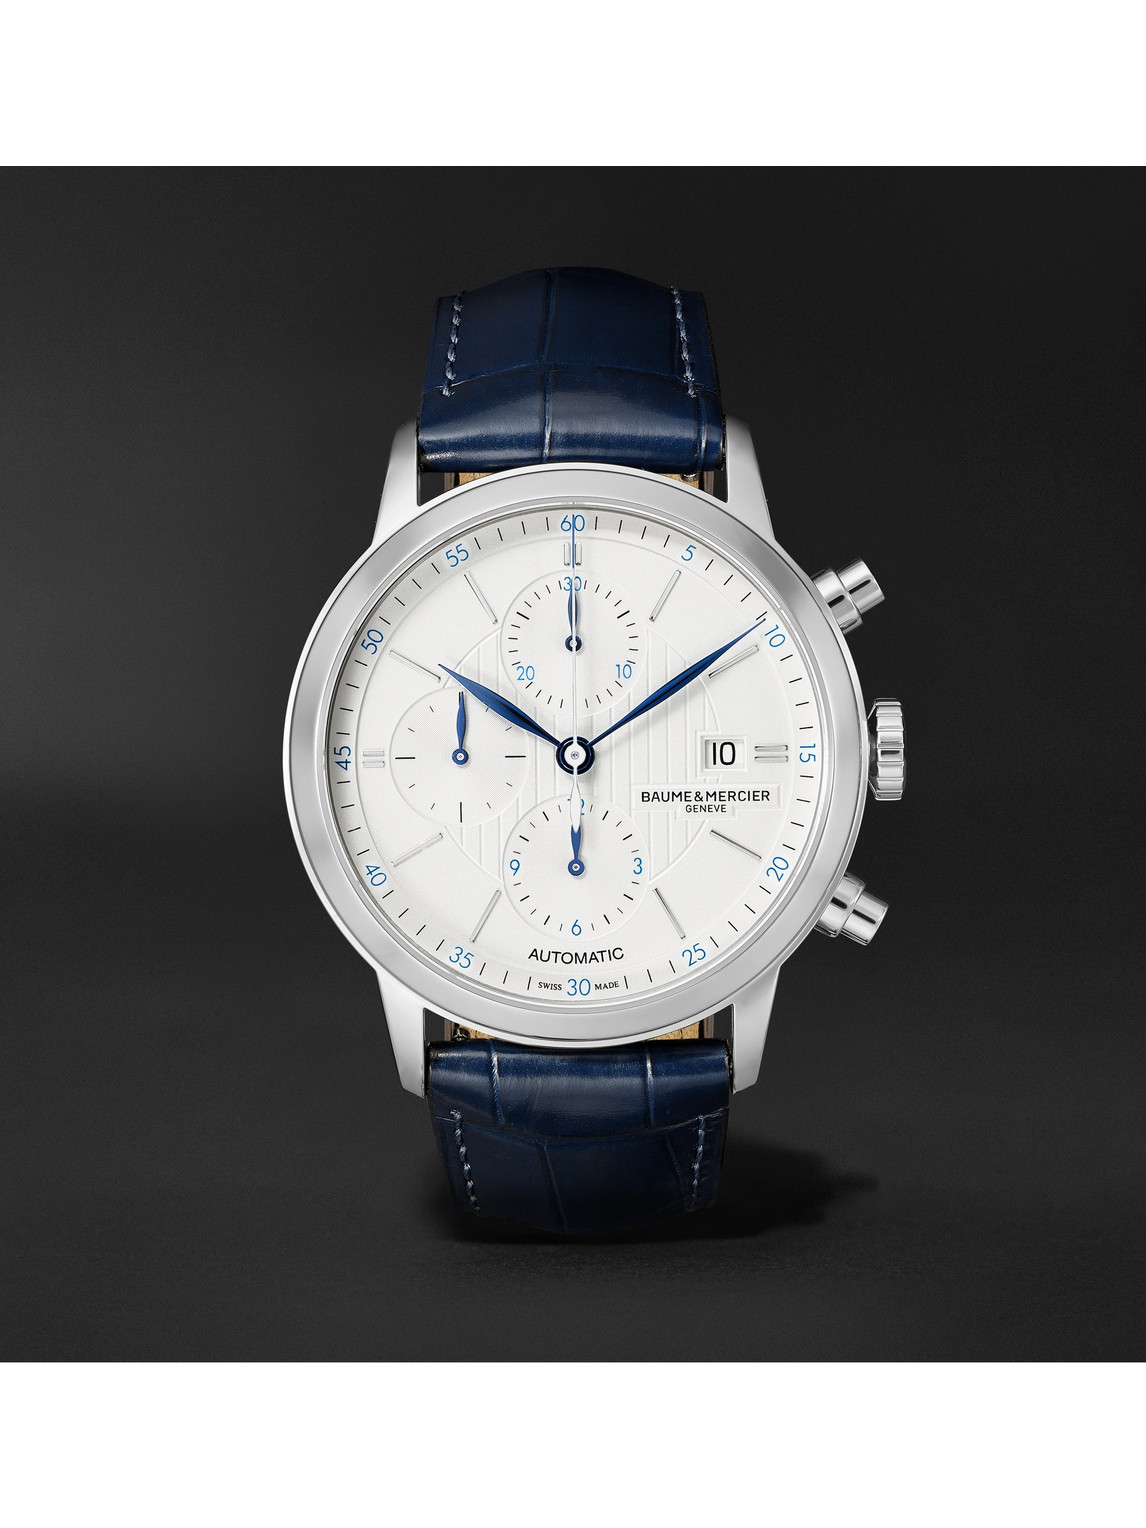 Baume & Mercier Classima Automatic Chronograph 42mm Steel And Alligator Watch, Ref. No. M0a10330 In Silver